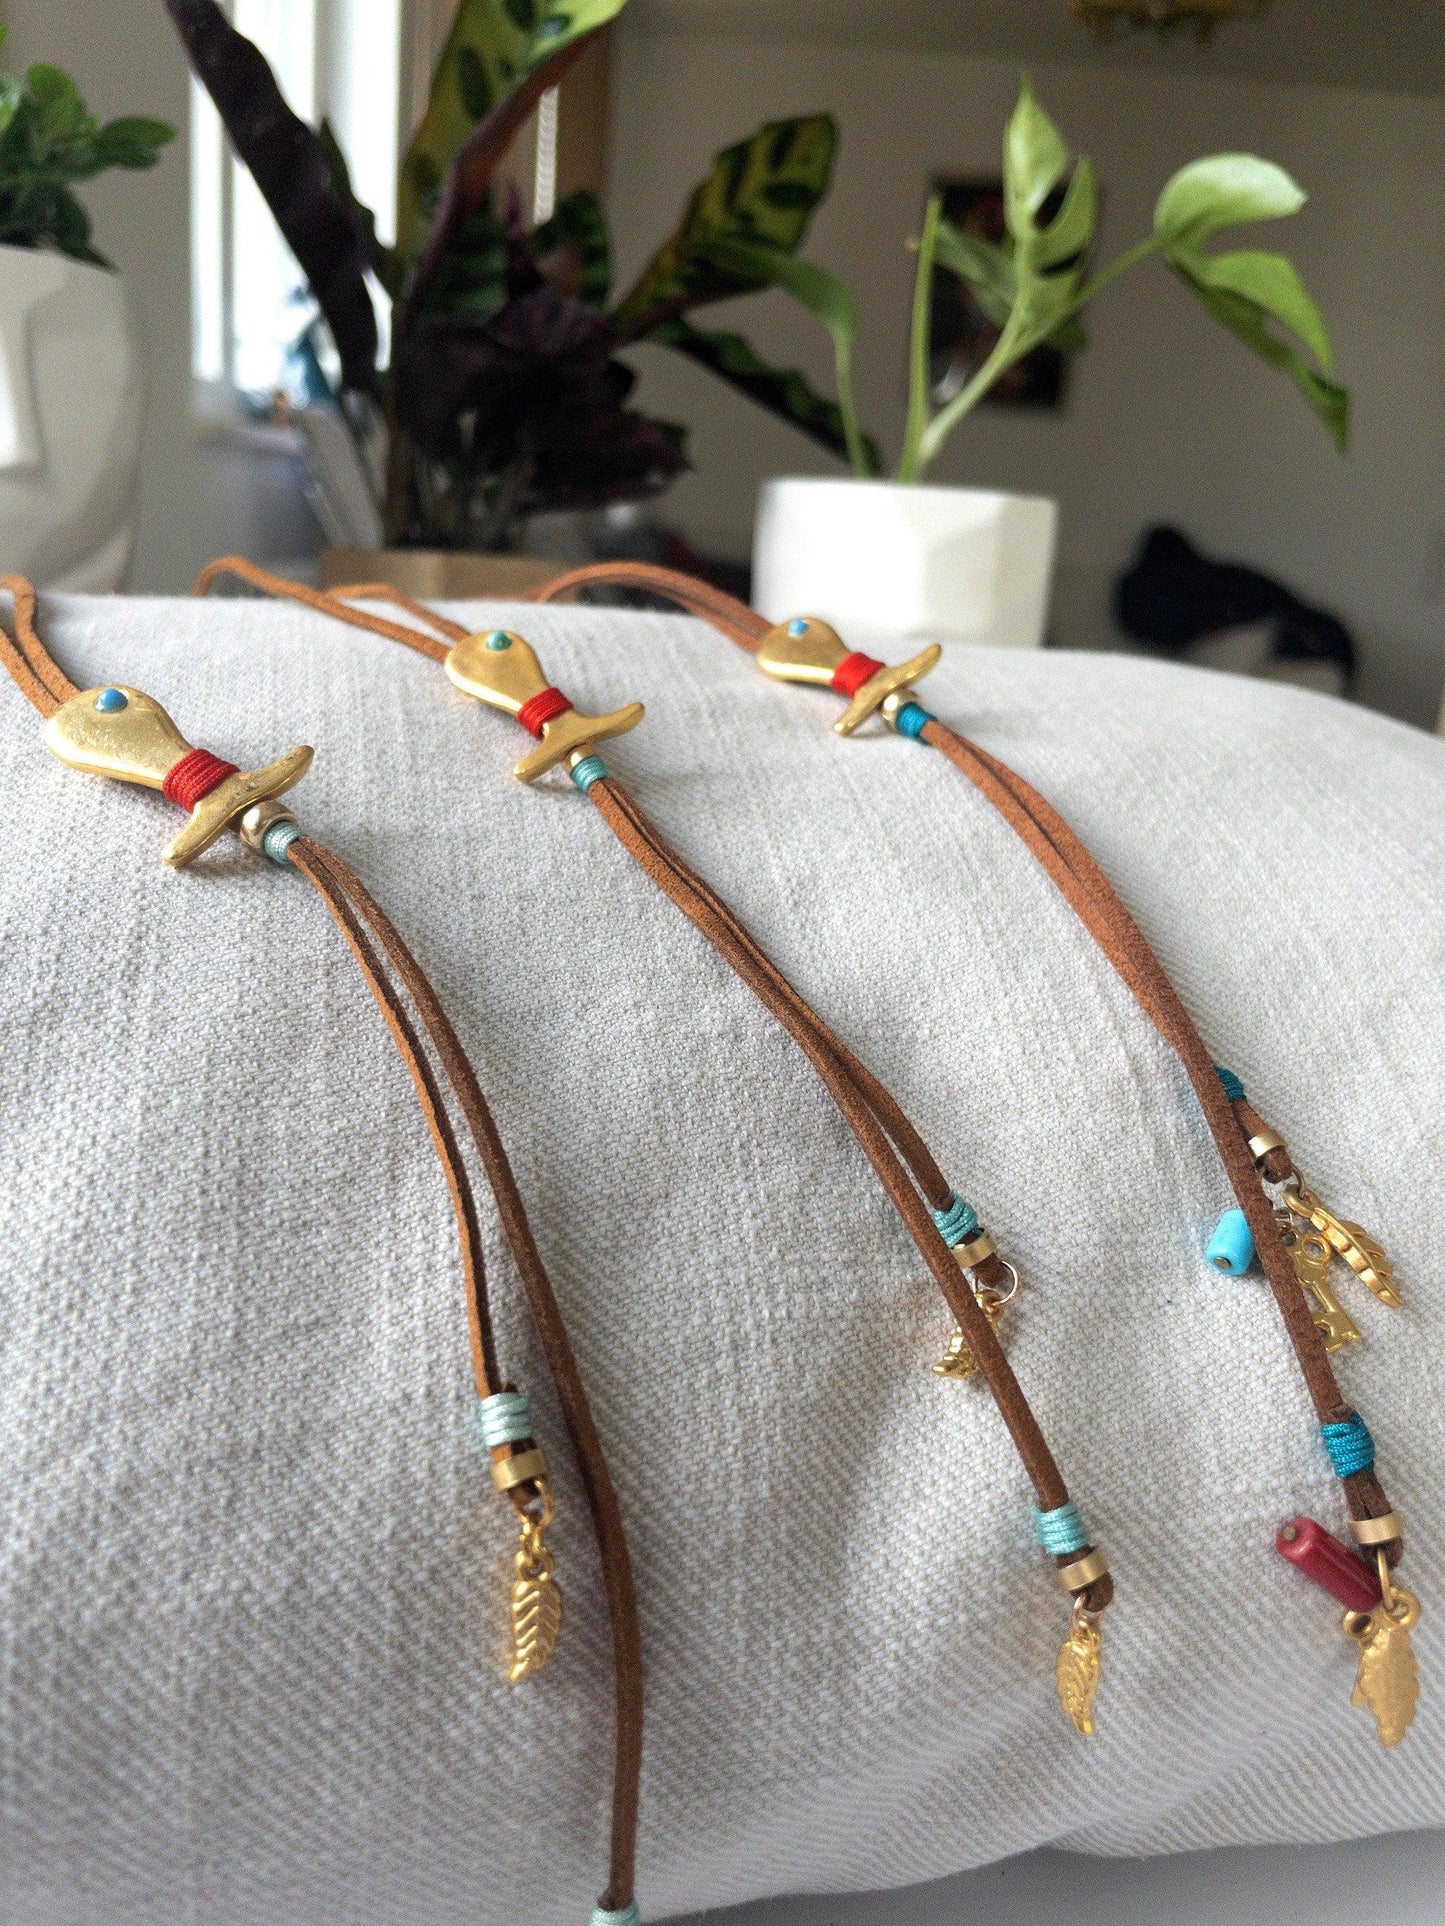 Long tassel leather suede necklace with a gold plated brass fish pendant | Boho dekoltee necklace | Bohemian jewelry | tassel necklaces - BeachPerfect.de